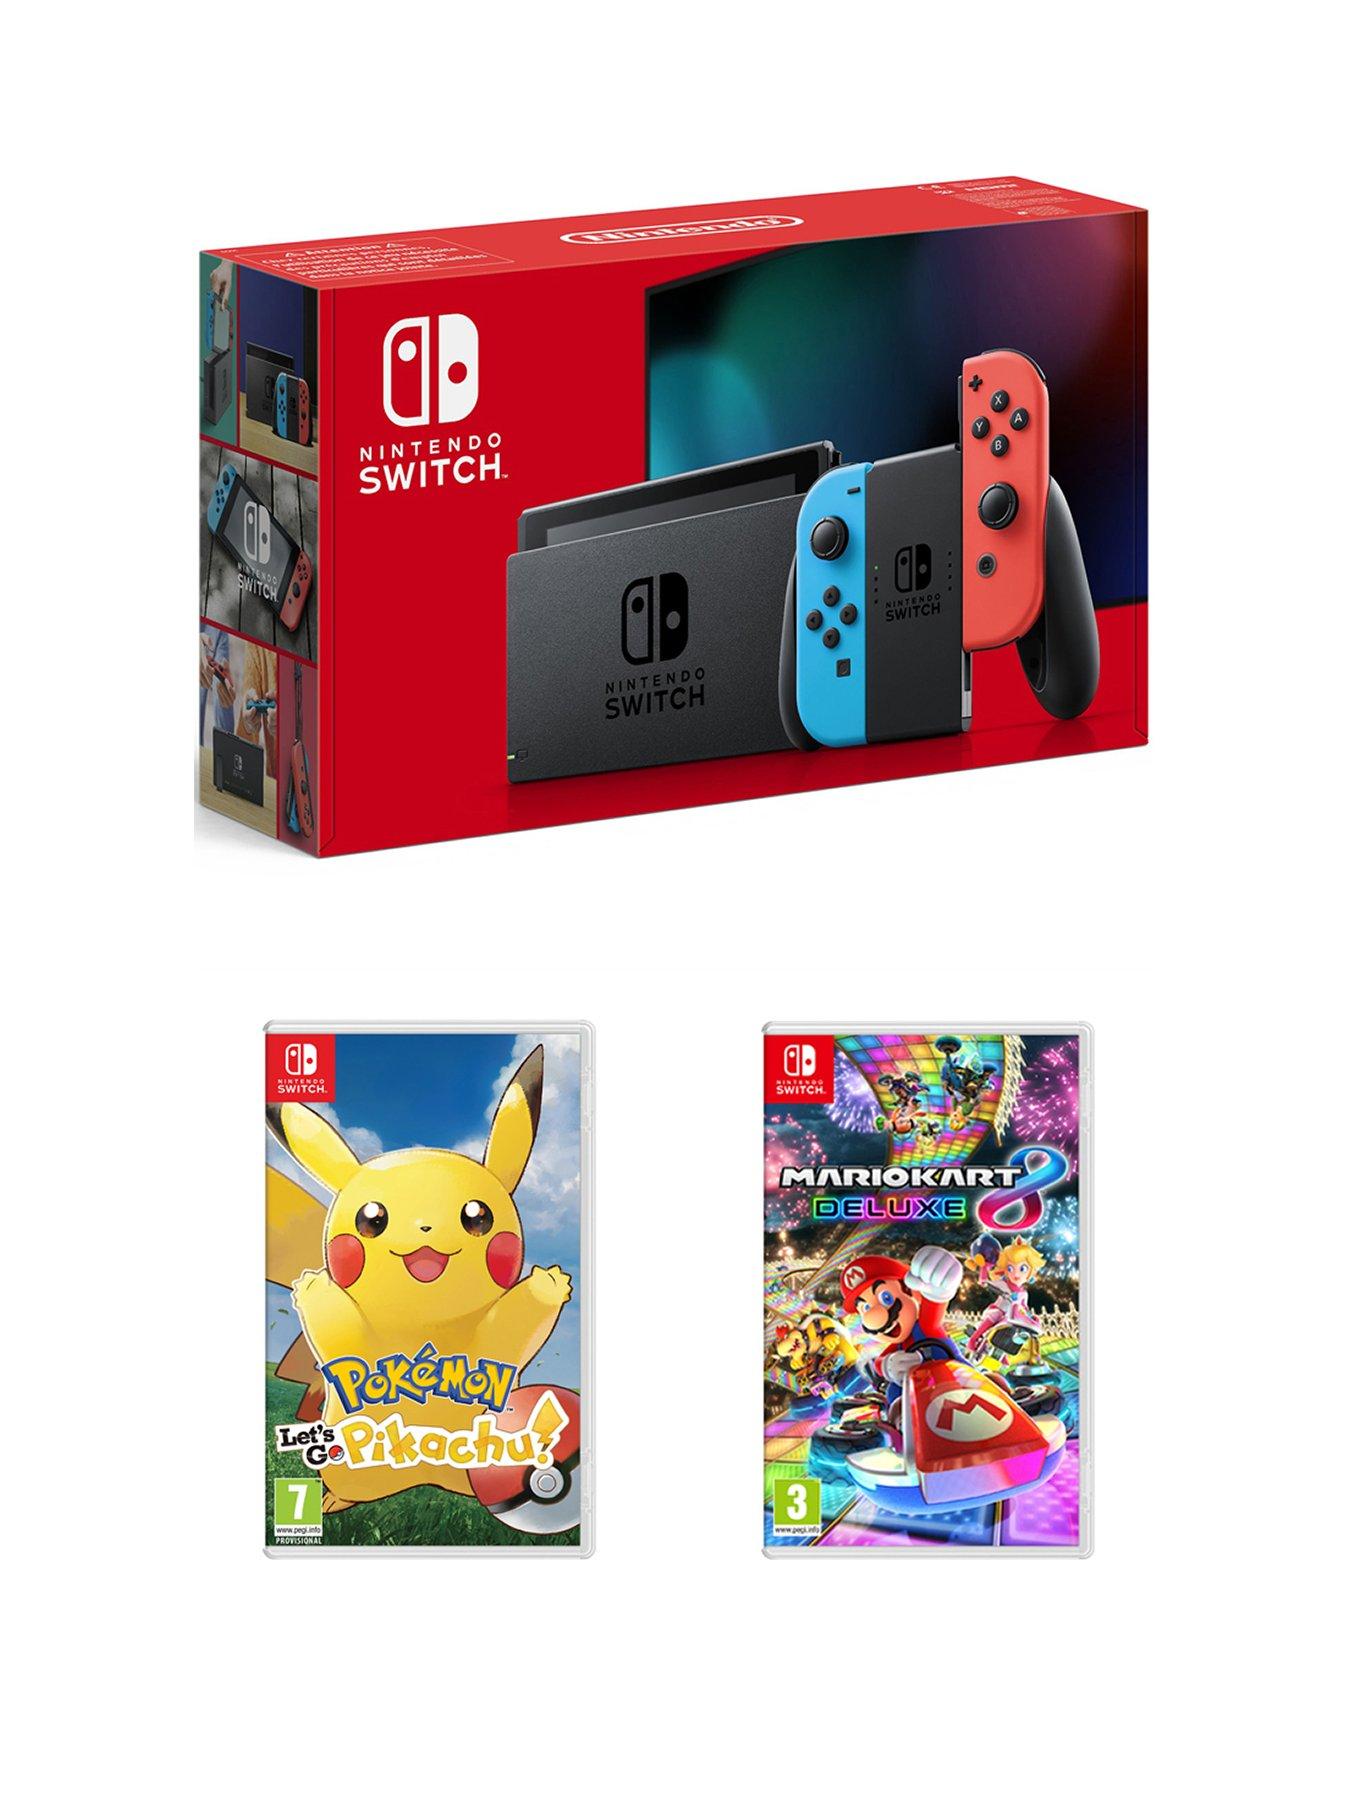 Nintendo Switch Console Improved Battery With Pokemon Lets Go Pikachu And Mario Kart 8 Deluxe - roblox monster jam urban assault for nintendo ds by